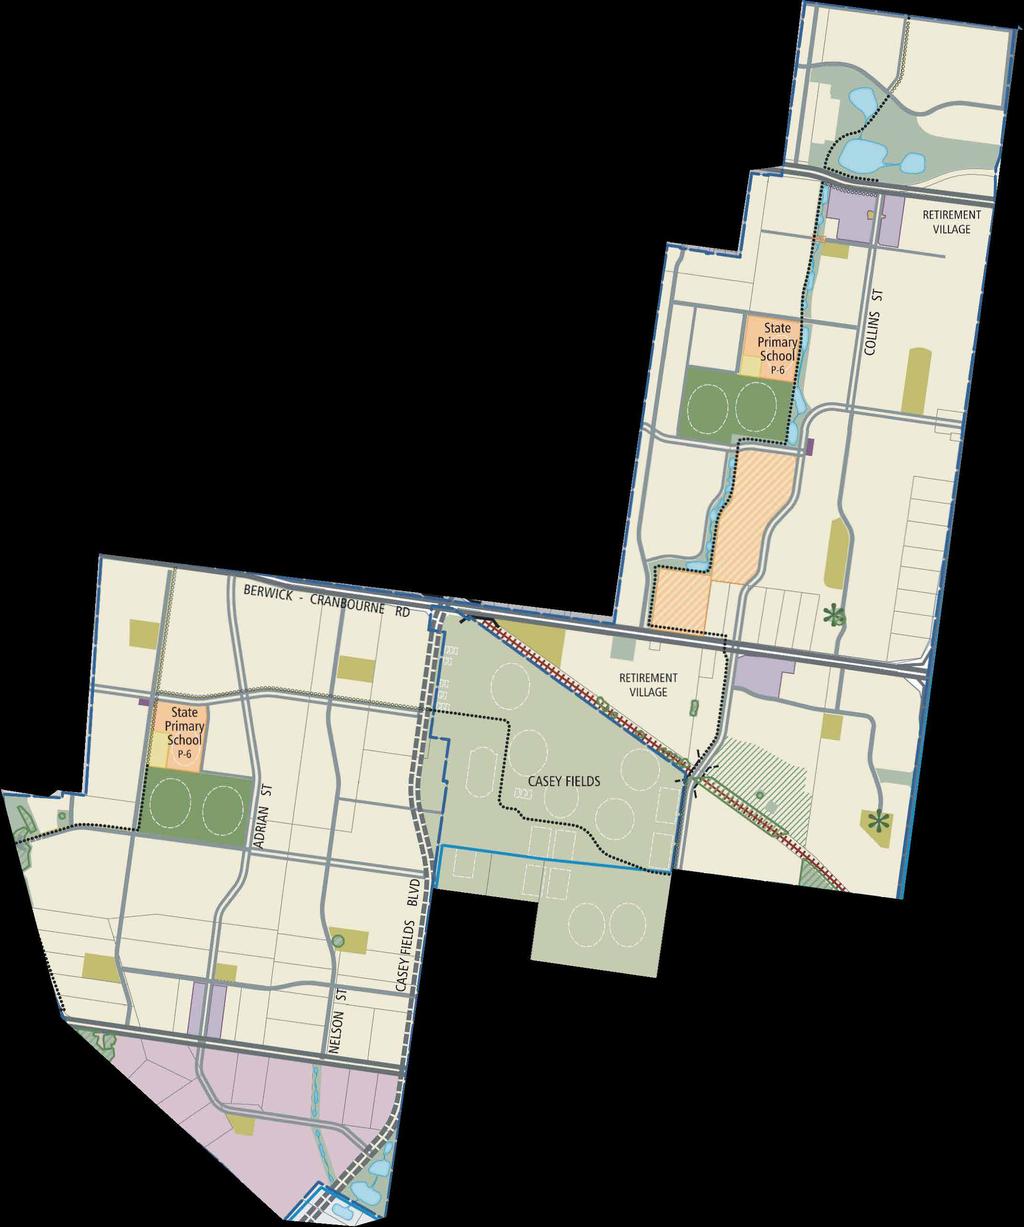 precinct (PSP 1054) and the Casey Fields South precinct (PSP 1057.1) in Clyde.